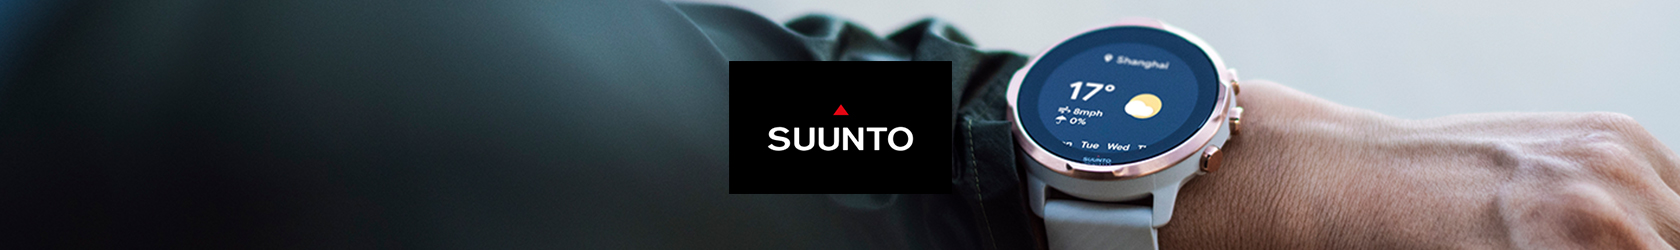 A person's wrist with a Suunto 7 watch and the Suunto logo in the centre of the image.